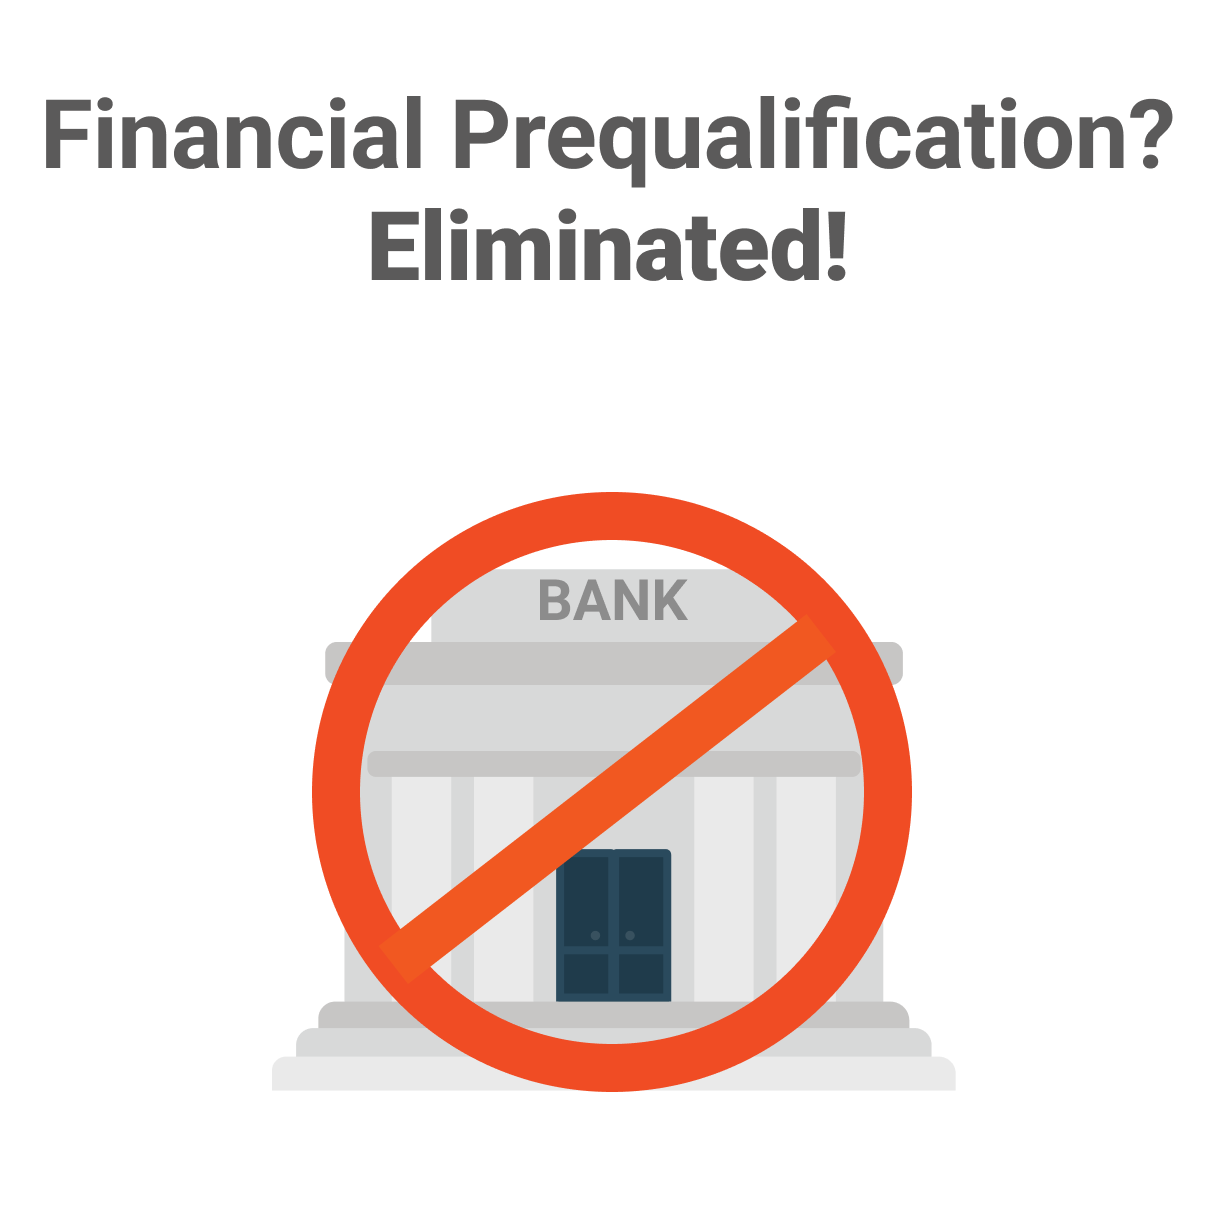 Chipi workflow makes Financial Prequalification irrelevant by shifting the financing and cash flow gaps back onto the developer